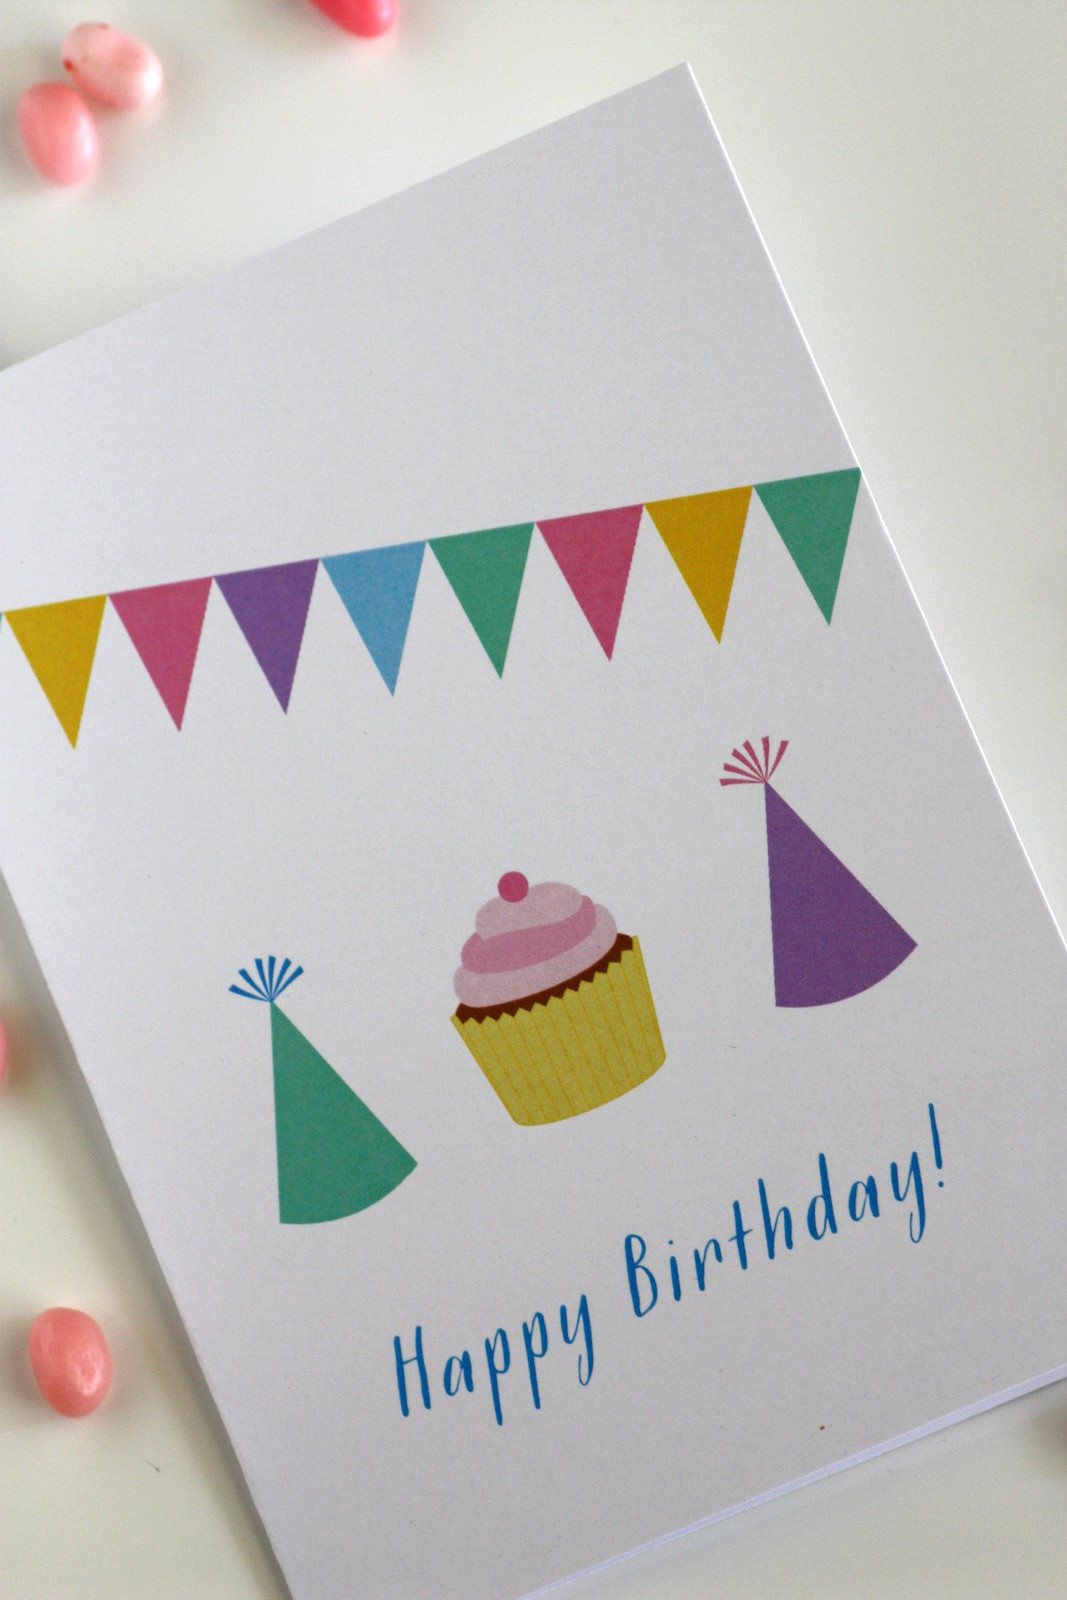 Free Printable Birthday Cards For Adults
 Free Printable Blank Birthday Cards